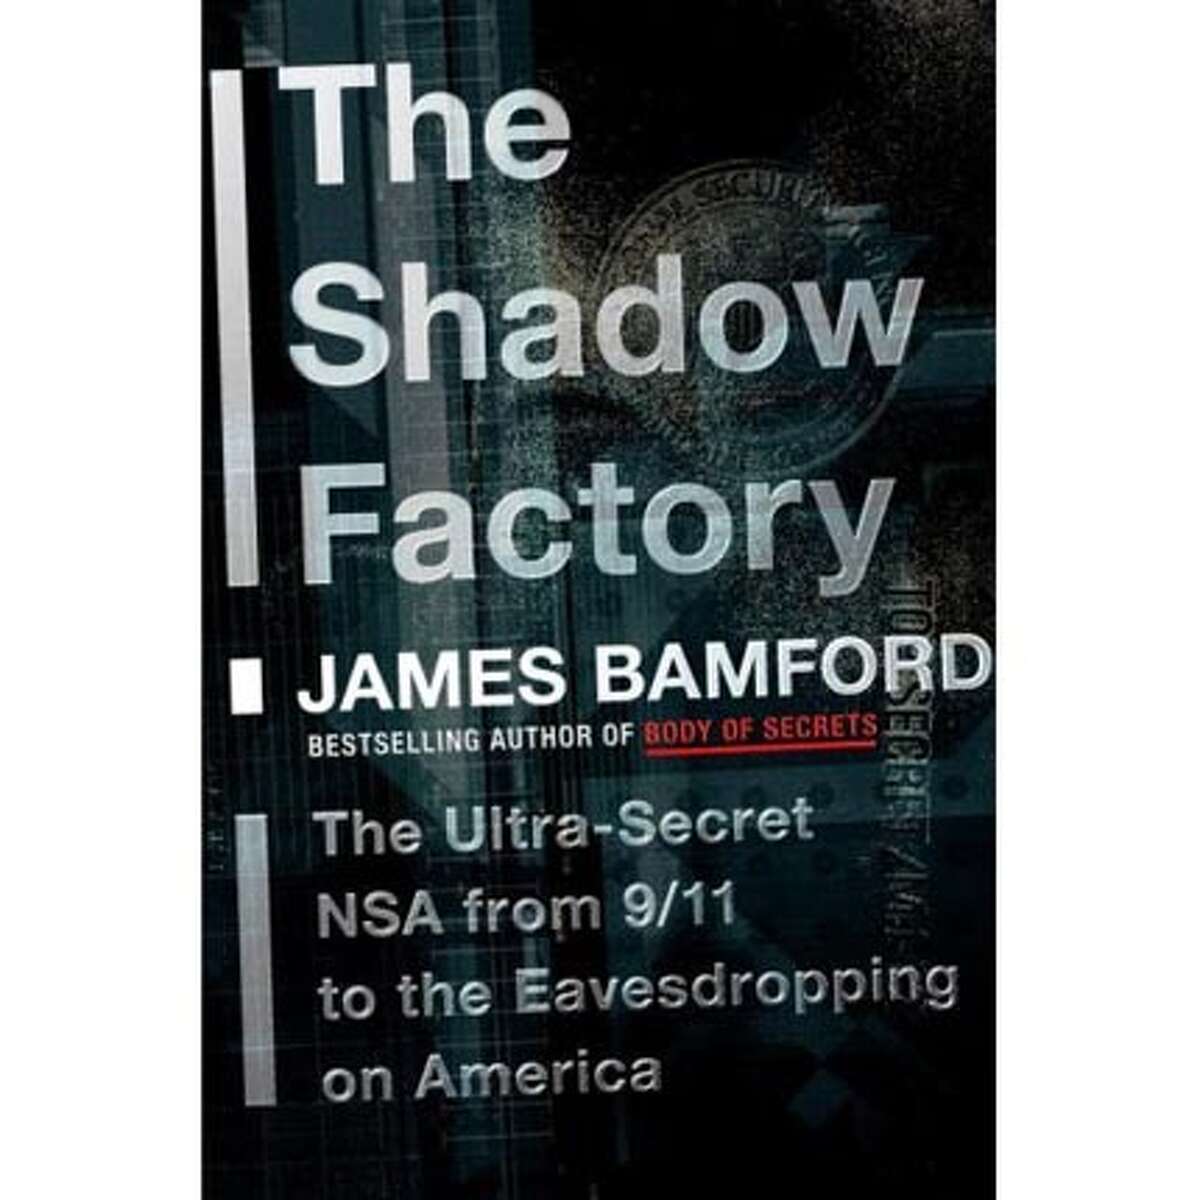 The Shadow Factory by James Bamford